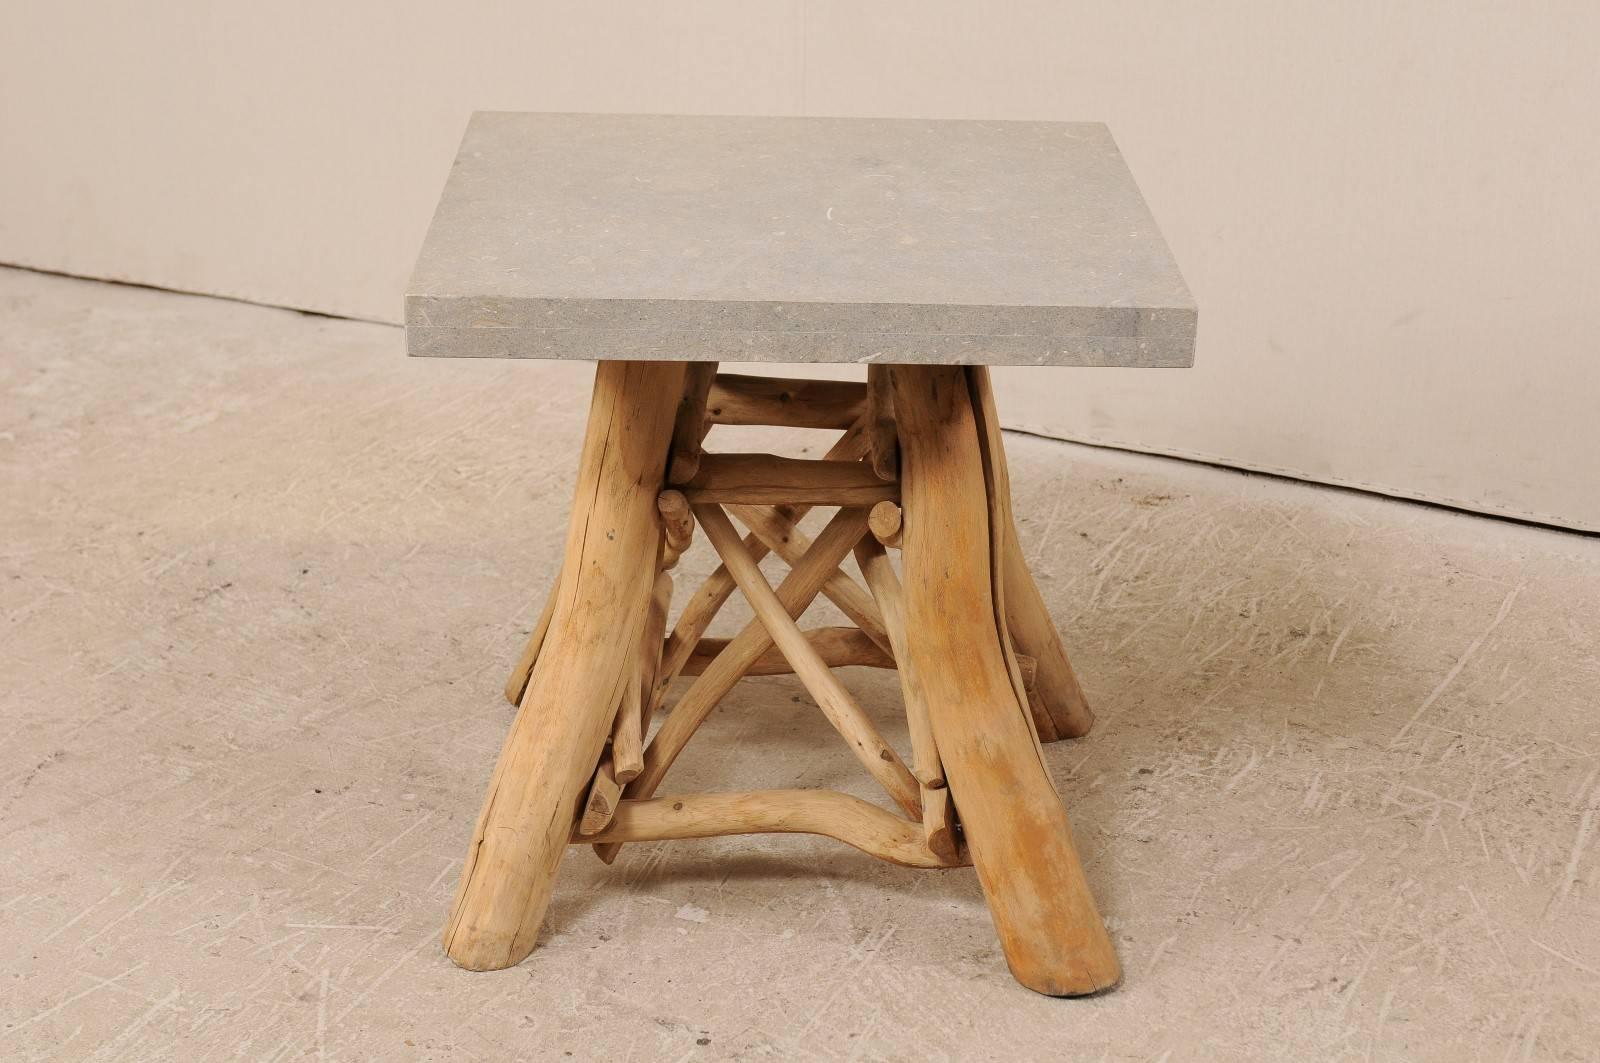 20th Century European Rustic Natural Tree Branch Occasional Table with Honed Stone Top